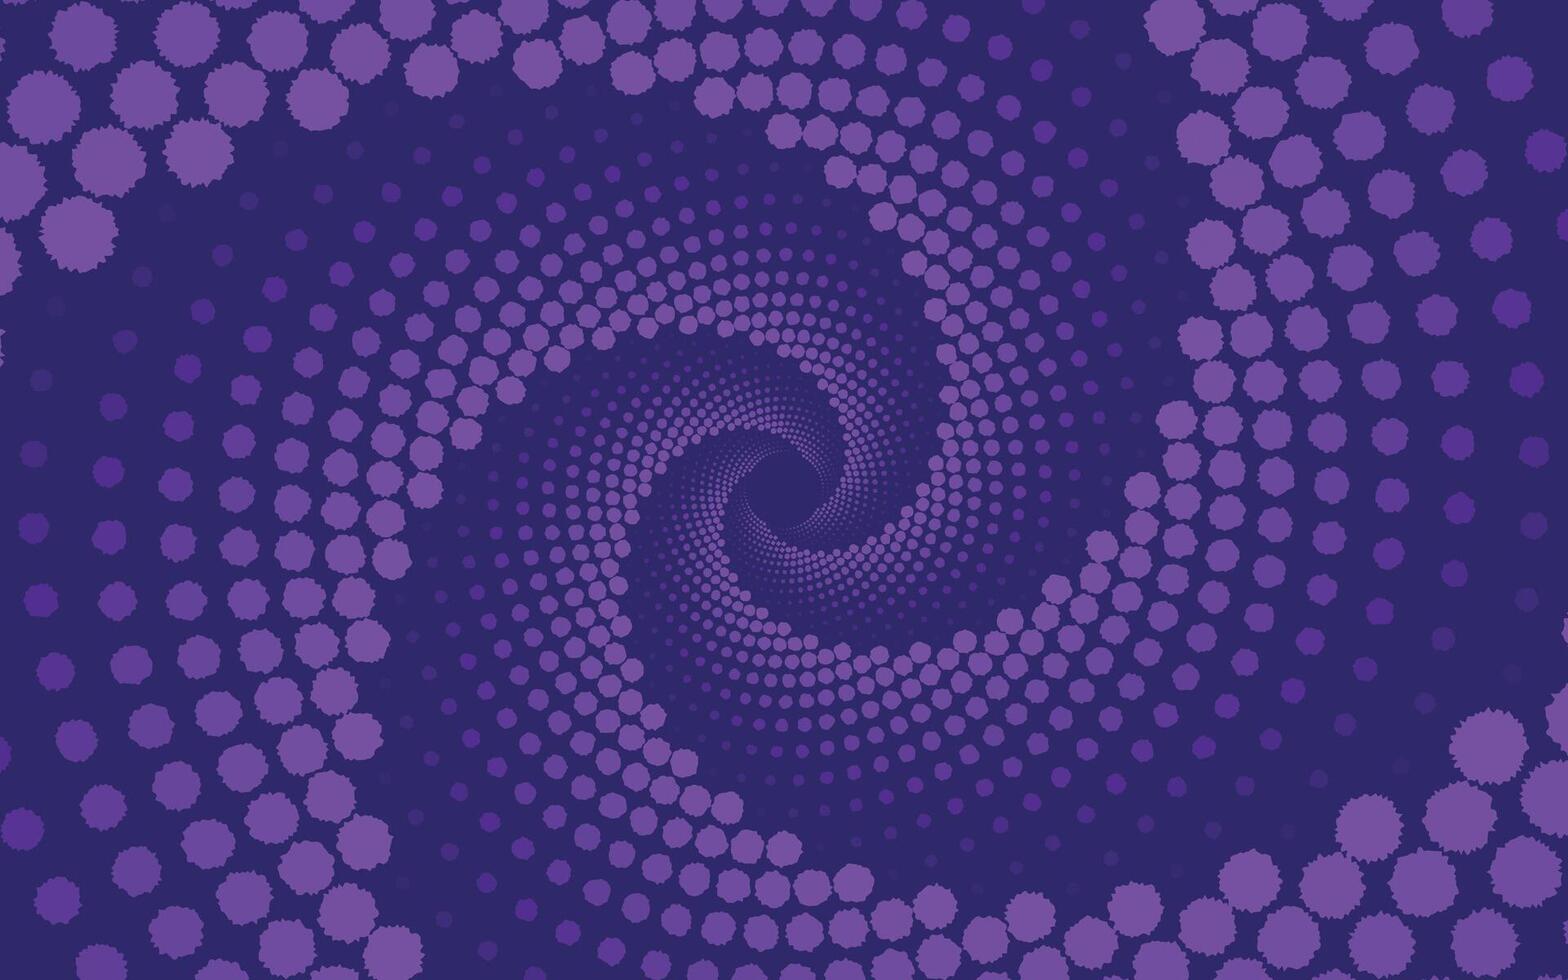 Abstract background with spiral dots vector